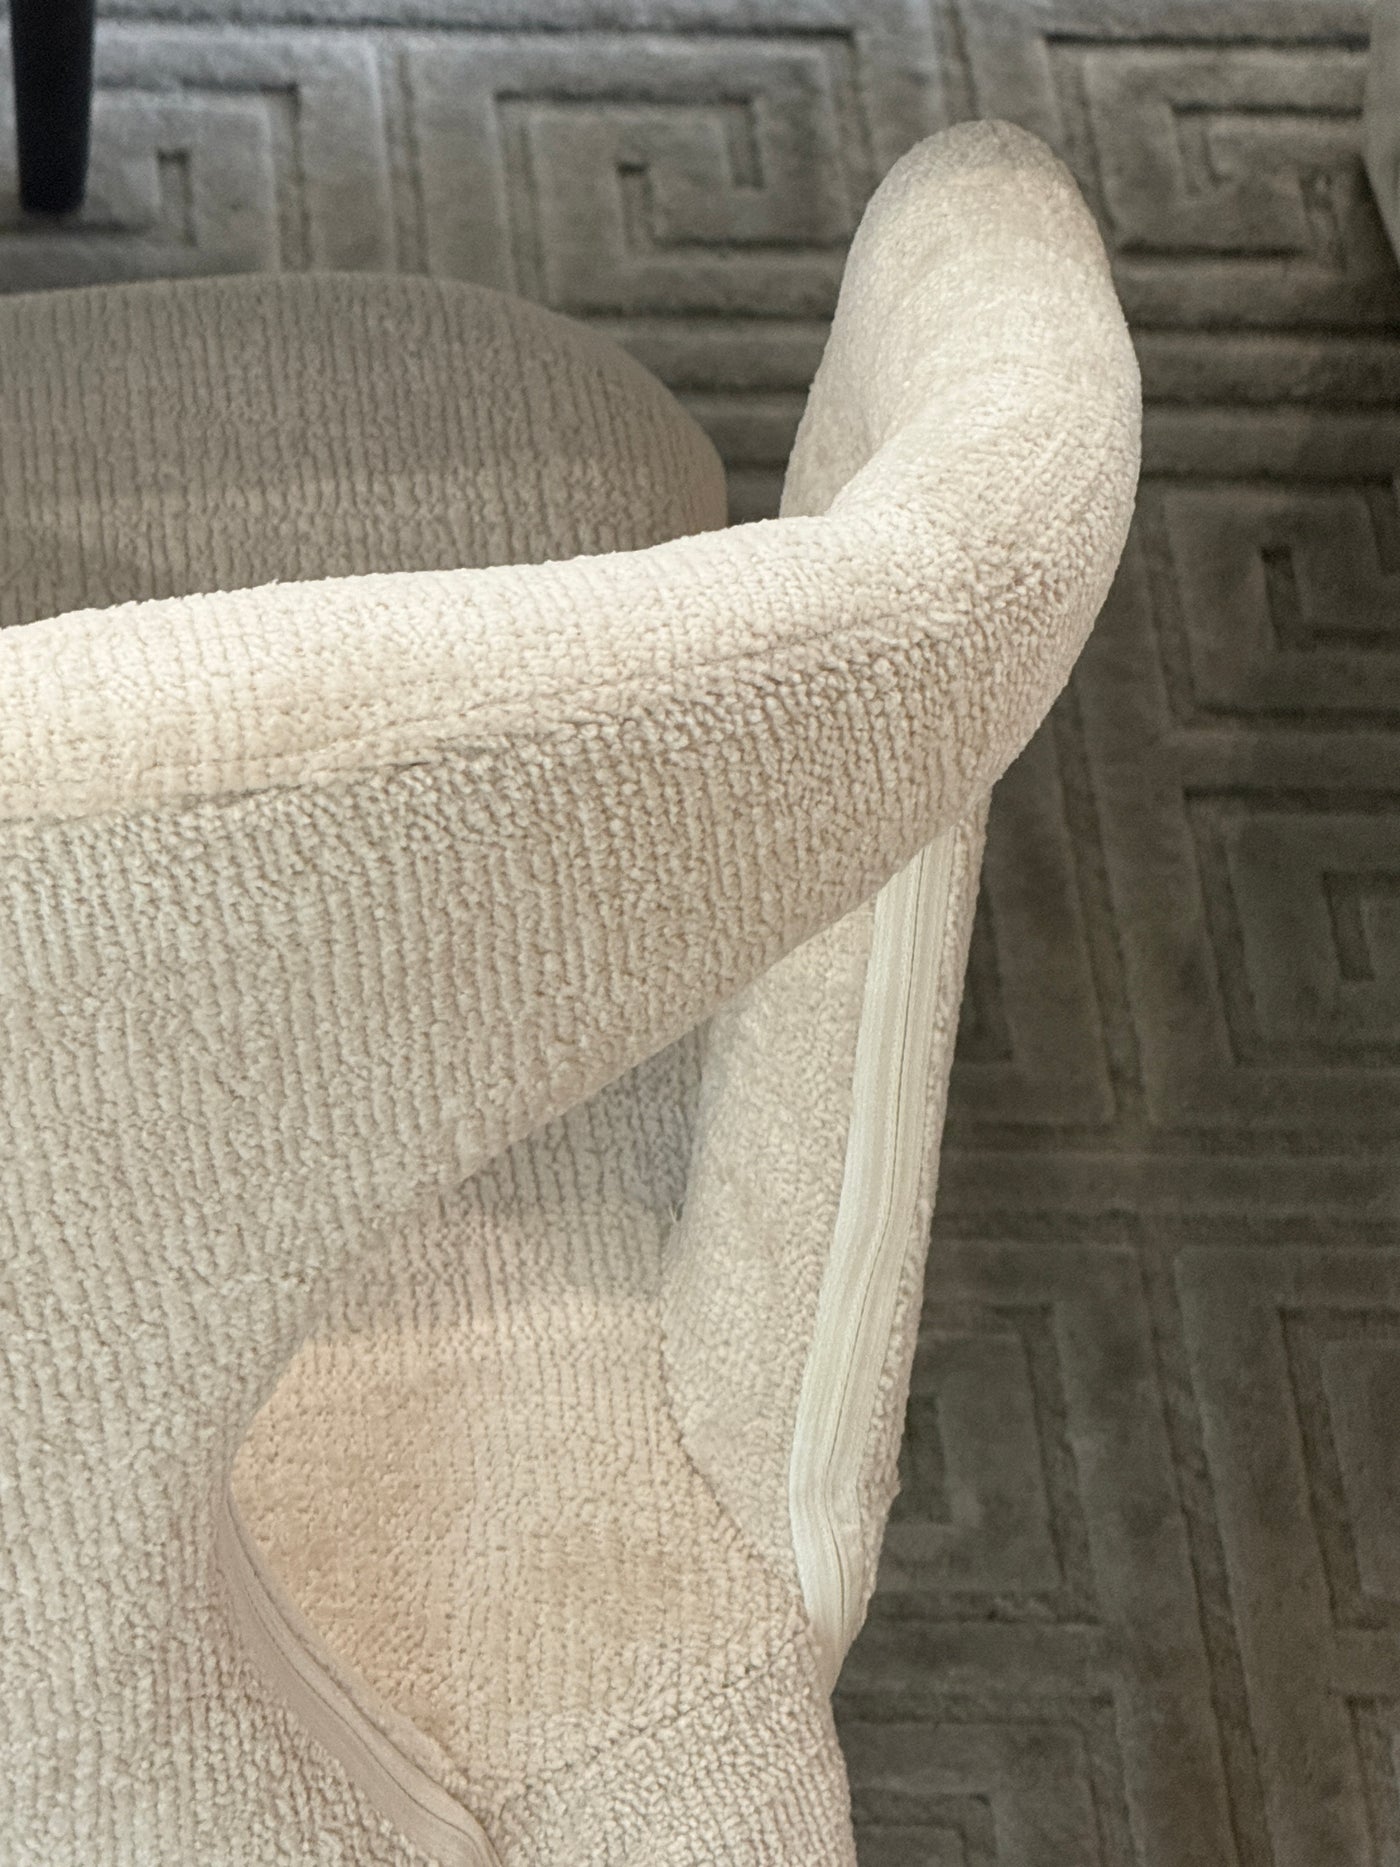 Profile Dining Chair Textured Beige